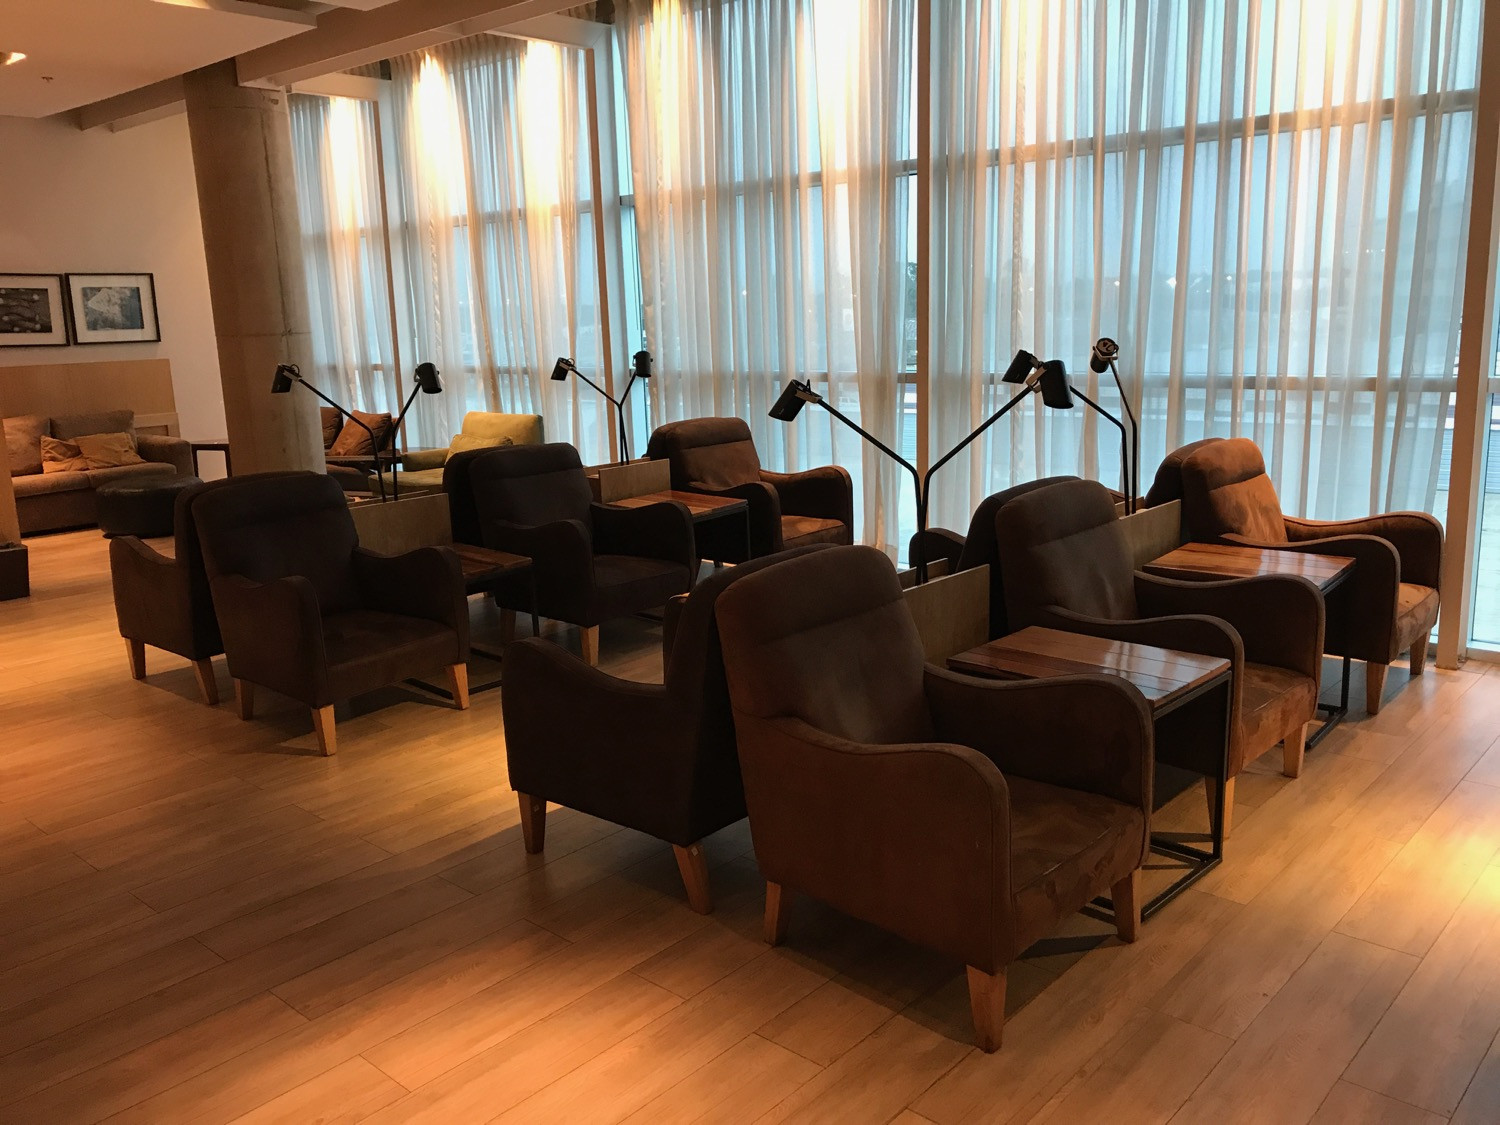 universal hardwood flooring los angeles ca of review star alliance lounge buenos aires eze live and lets fly for as you enter the lounge pick up a voucher with the internet code internet worked very well for most of my stay though for one period of about 15 minutes